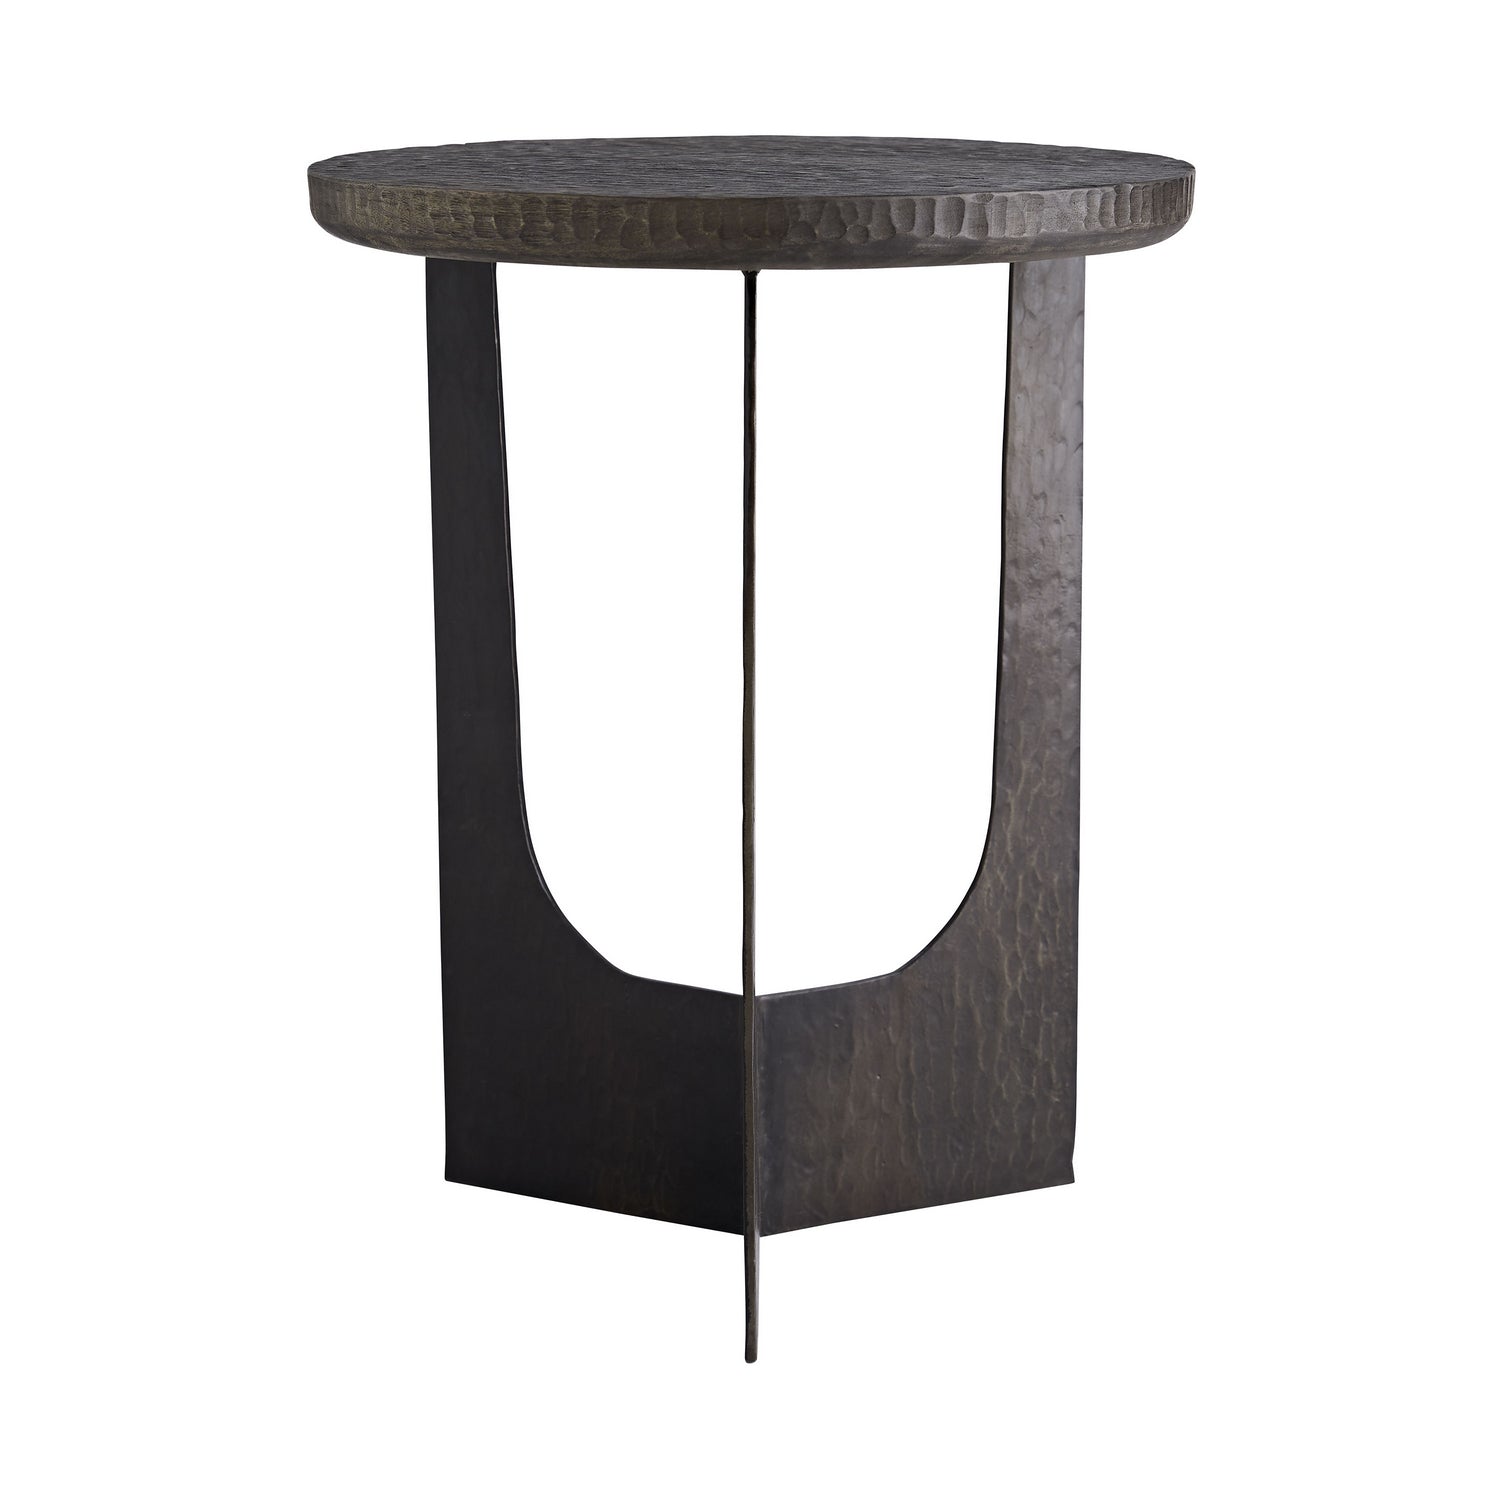 Table from the Dustin collection in Soft Black Waxed finish